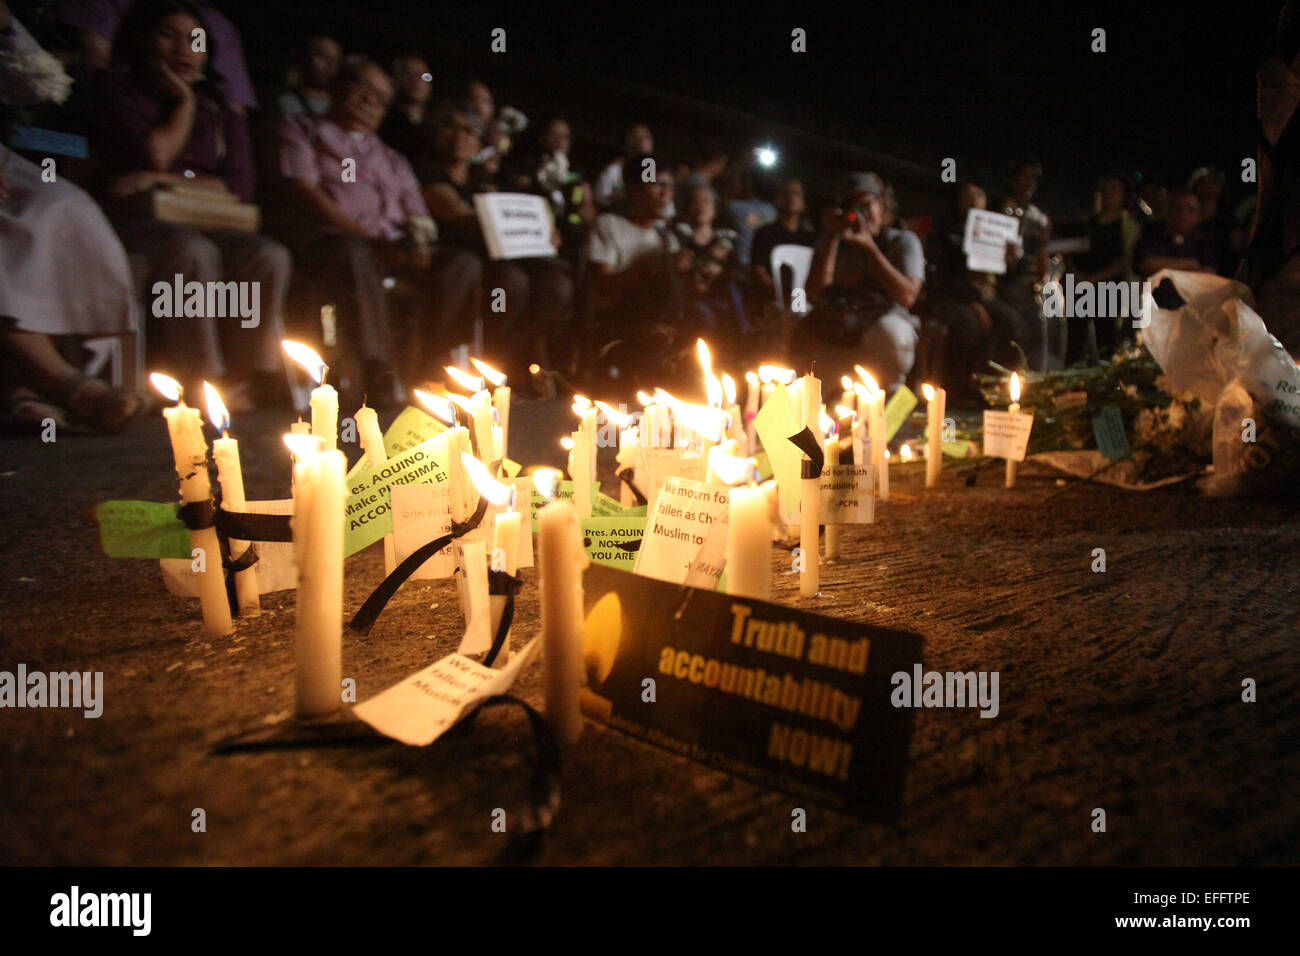 (150203) -- QUEZON CITY, Feb. 3, 2015 (Xinhua) -- People light candles and offer flowers and prayers for the slain 49 members of the Philippine National Police Special Action Force(PNP-SAF) at the gate of the PNP Headquarters in Quezon City, the Philippines, Feb. 3, 2015. There was lack of coordination and planning between the military forces and the leadership of the PNP-SAF during the violent clash in Mamasapano, Maguindanao on Jan. 25, chief of the Armed Forces of the Philippines said on Tuesday. (Xinhua/Rouelle Umali) (lmz) Stock Photo